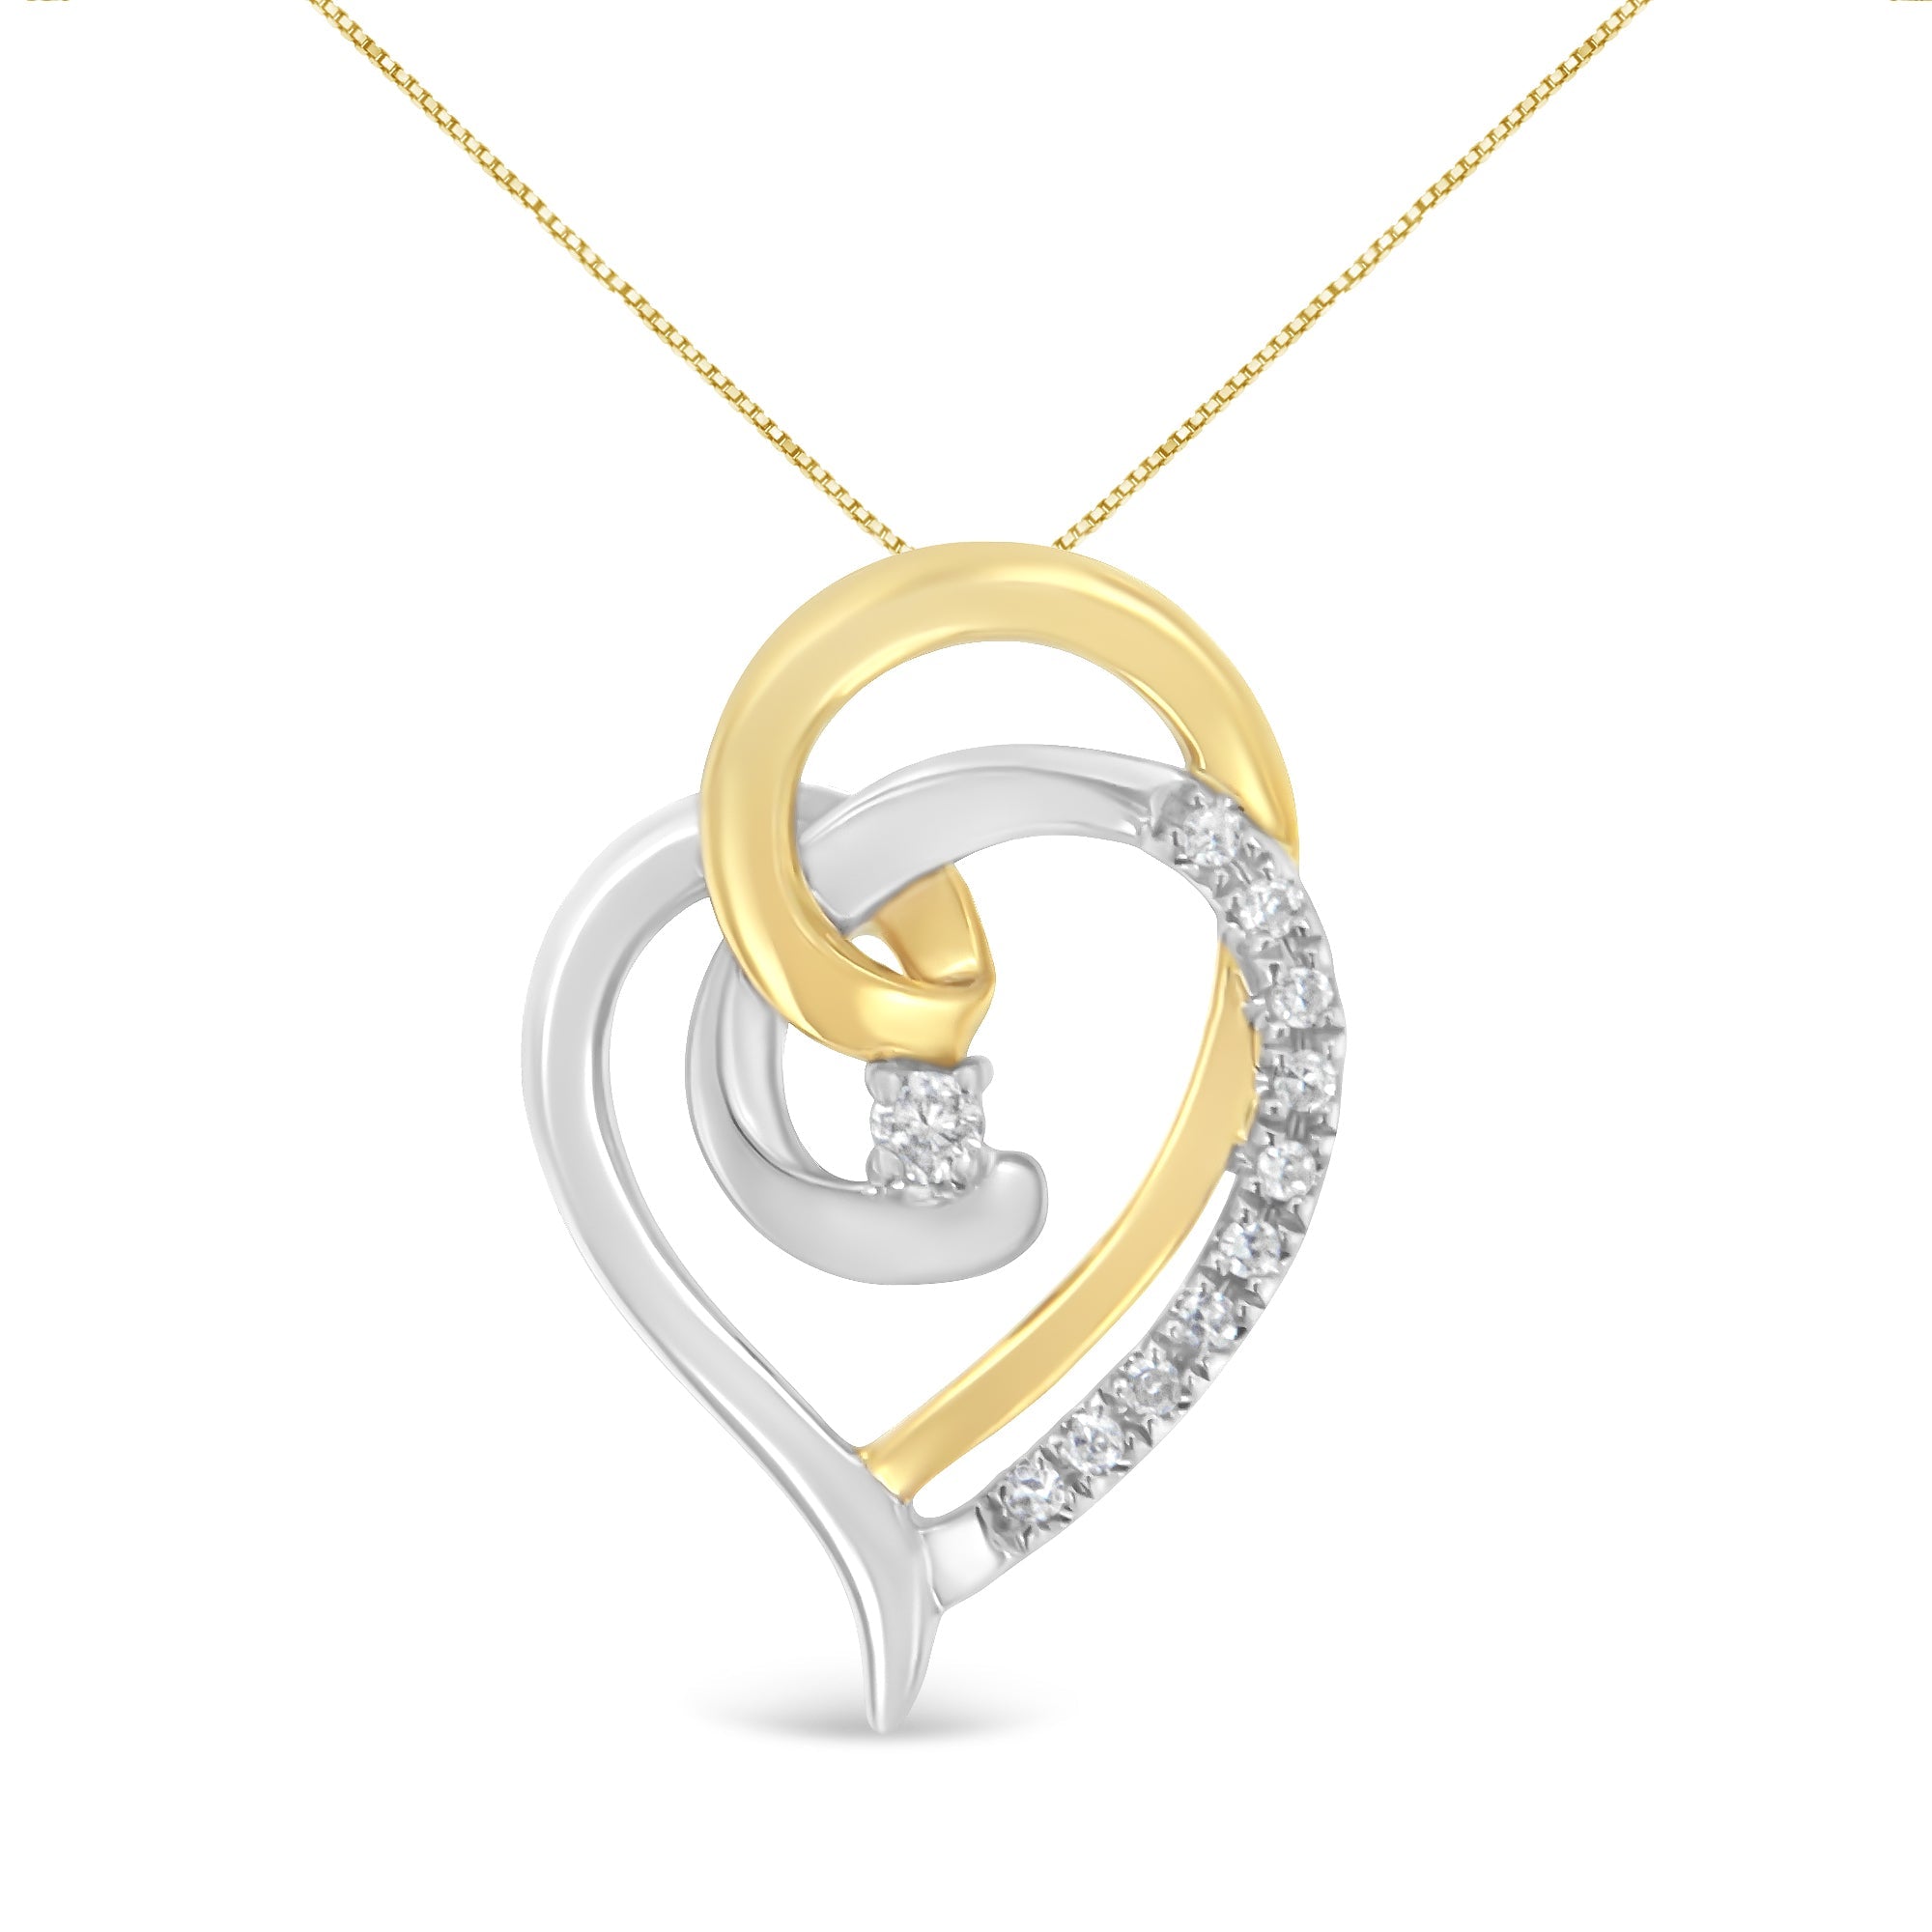 10K Yellow And White Gold Diamond Accent Open Double Heart Spiral Curl 18" Pendant Necklace (J-K Color, I2-I3 Clarity) - Tuesday Morning-Pendant Necklace